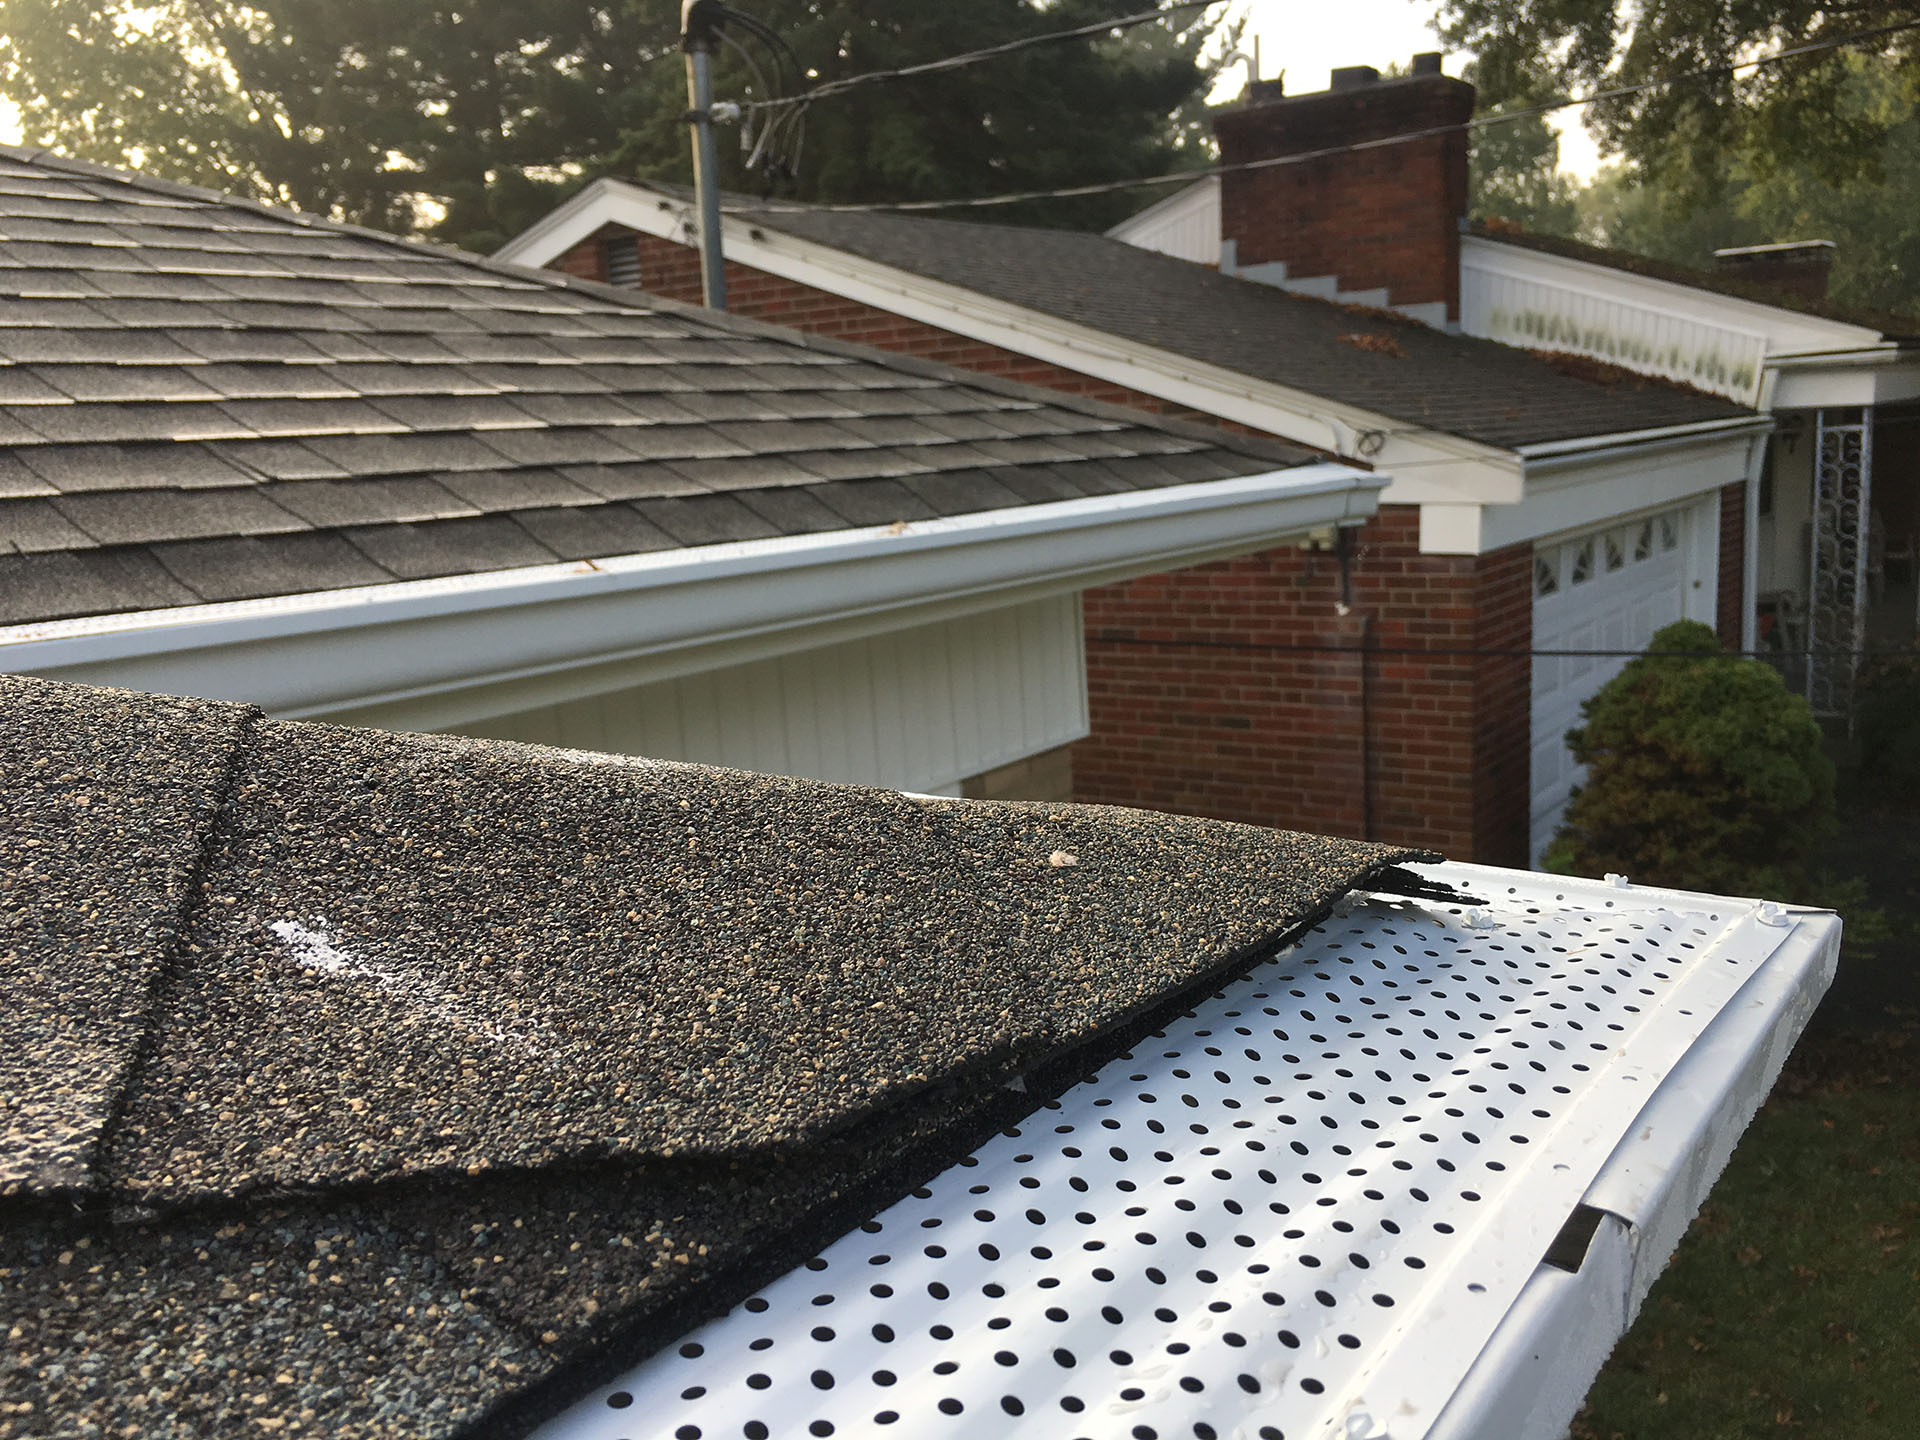 gutter rx guards install guard gutters installation inch metal rubber roof installed wood estimate clay